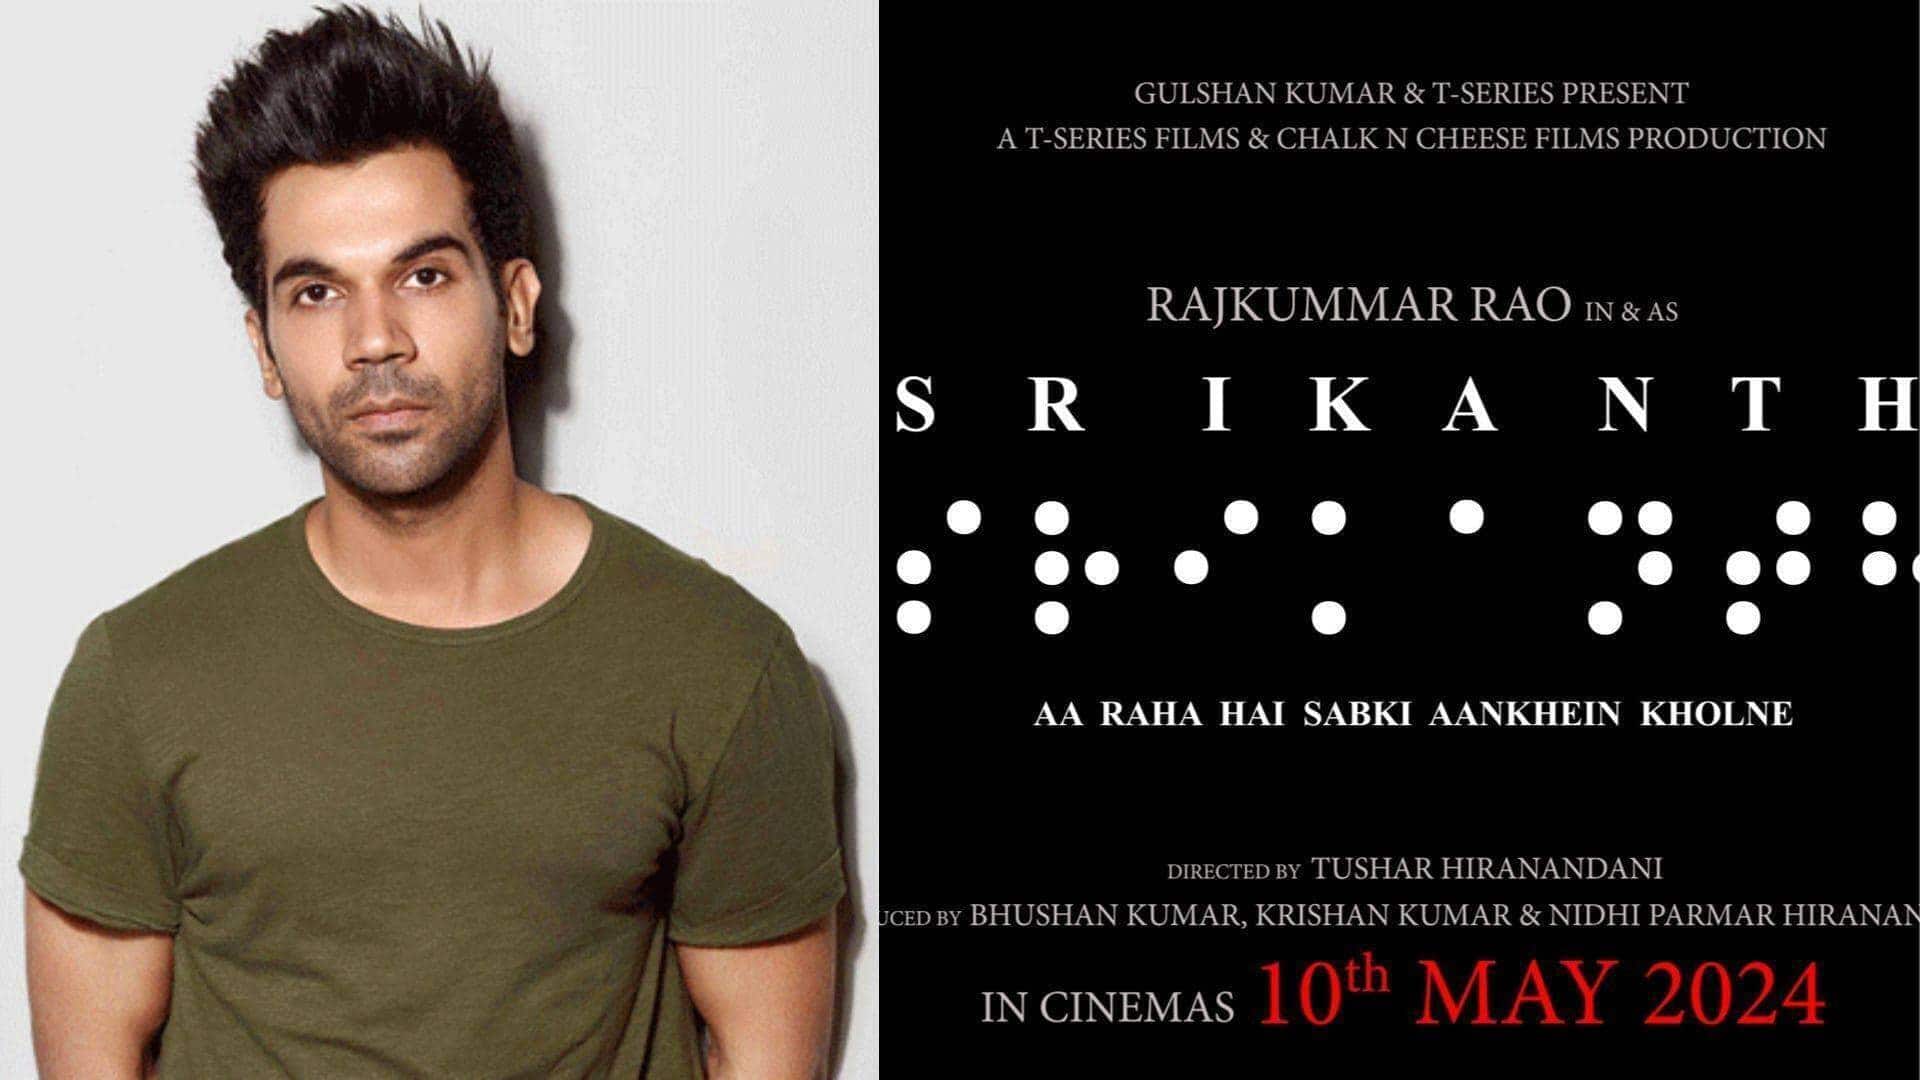 'Srikanth' surpasses '12th Fail' in opening weekend earnings